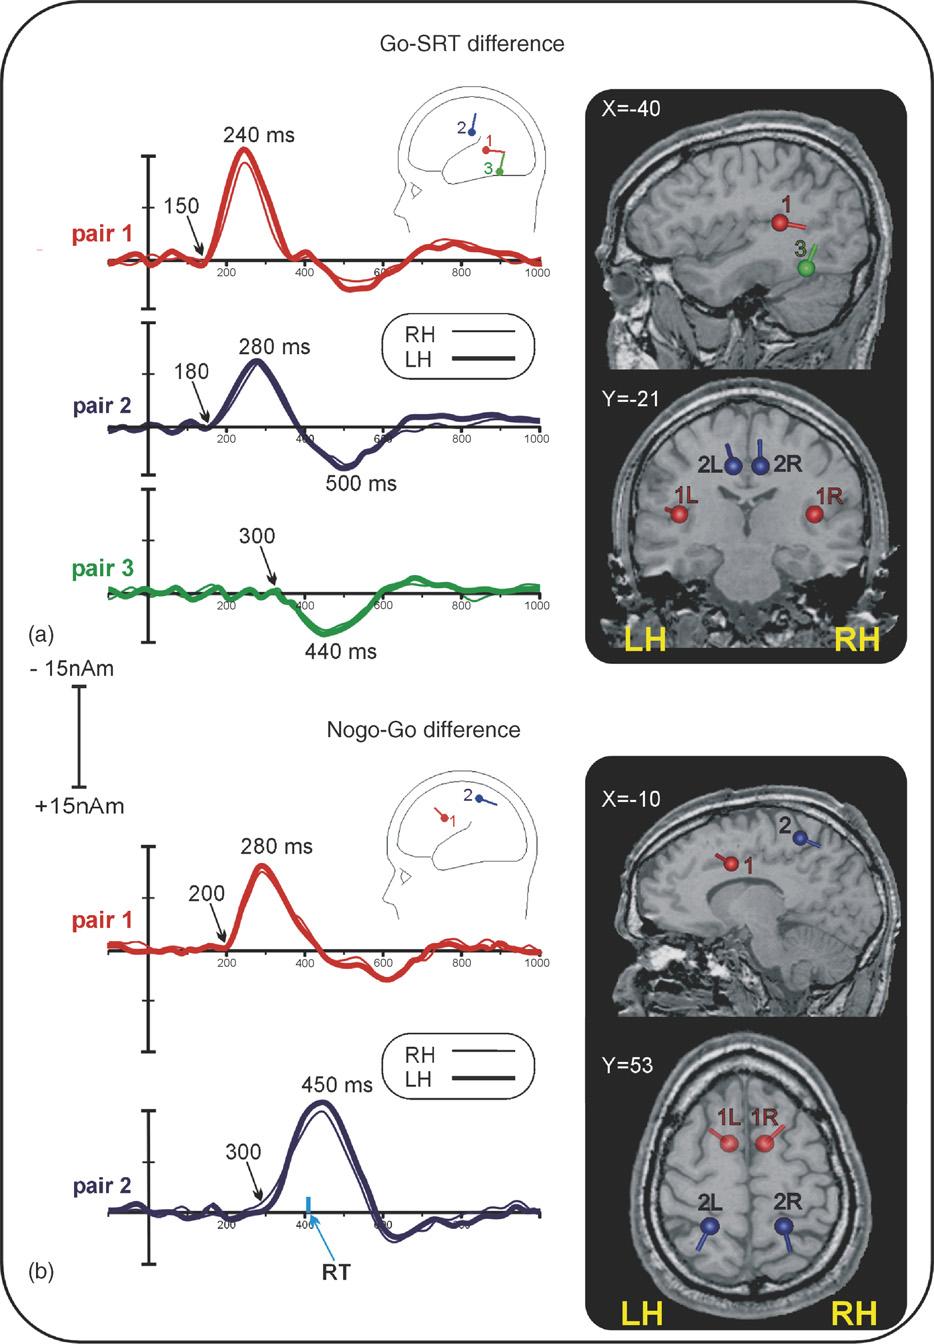 F. Di Russo et al. / Neuroscience Letters 408 (2006) 113 118 117 Fig. 3. Source analysis of the ERPs obtained in the Go minus SRT and in the No-go minus Go differences.